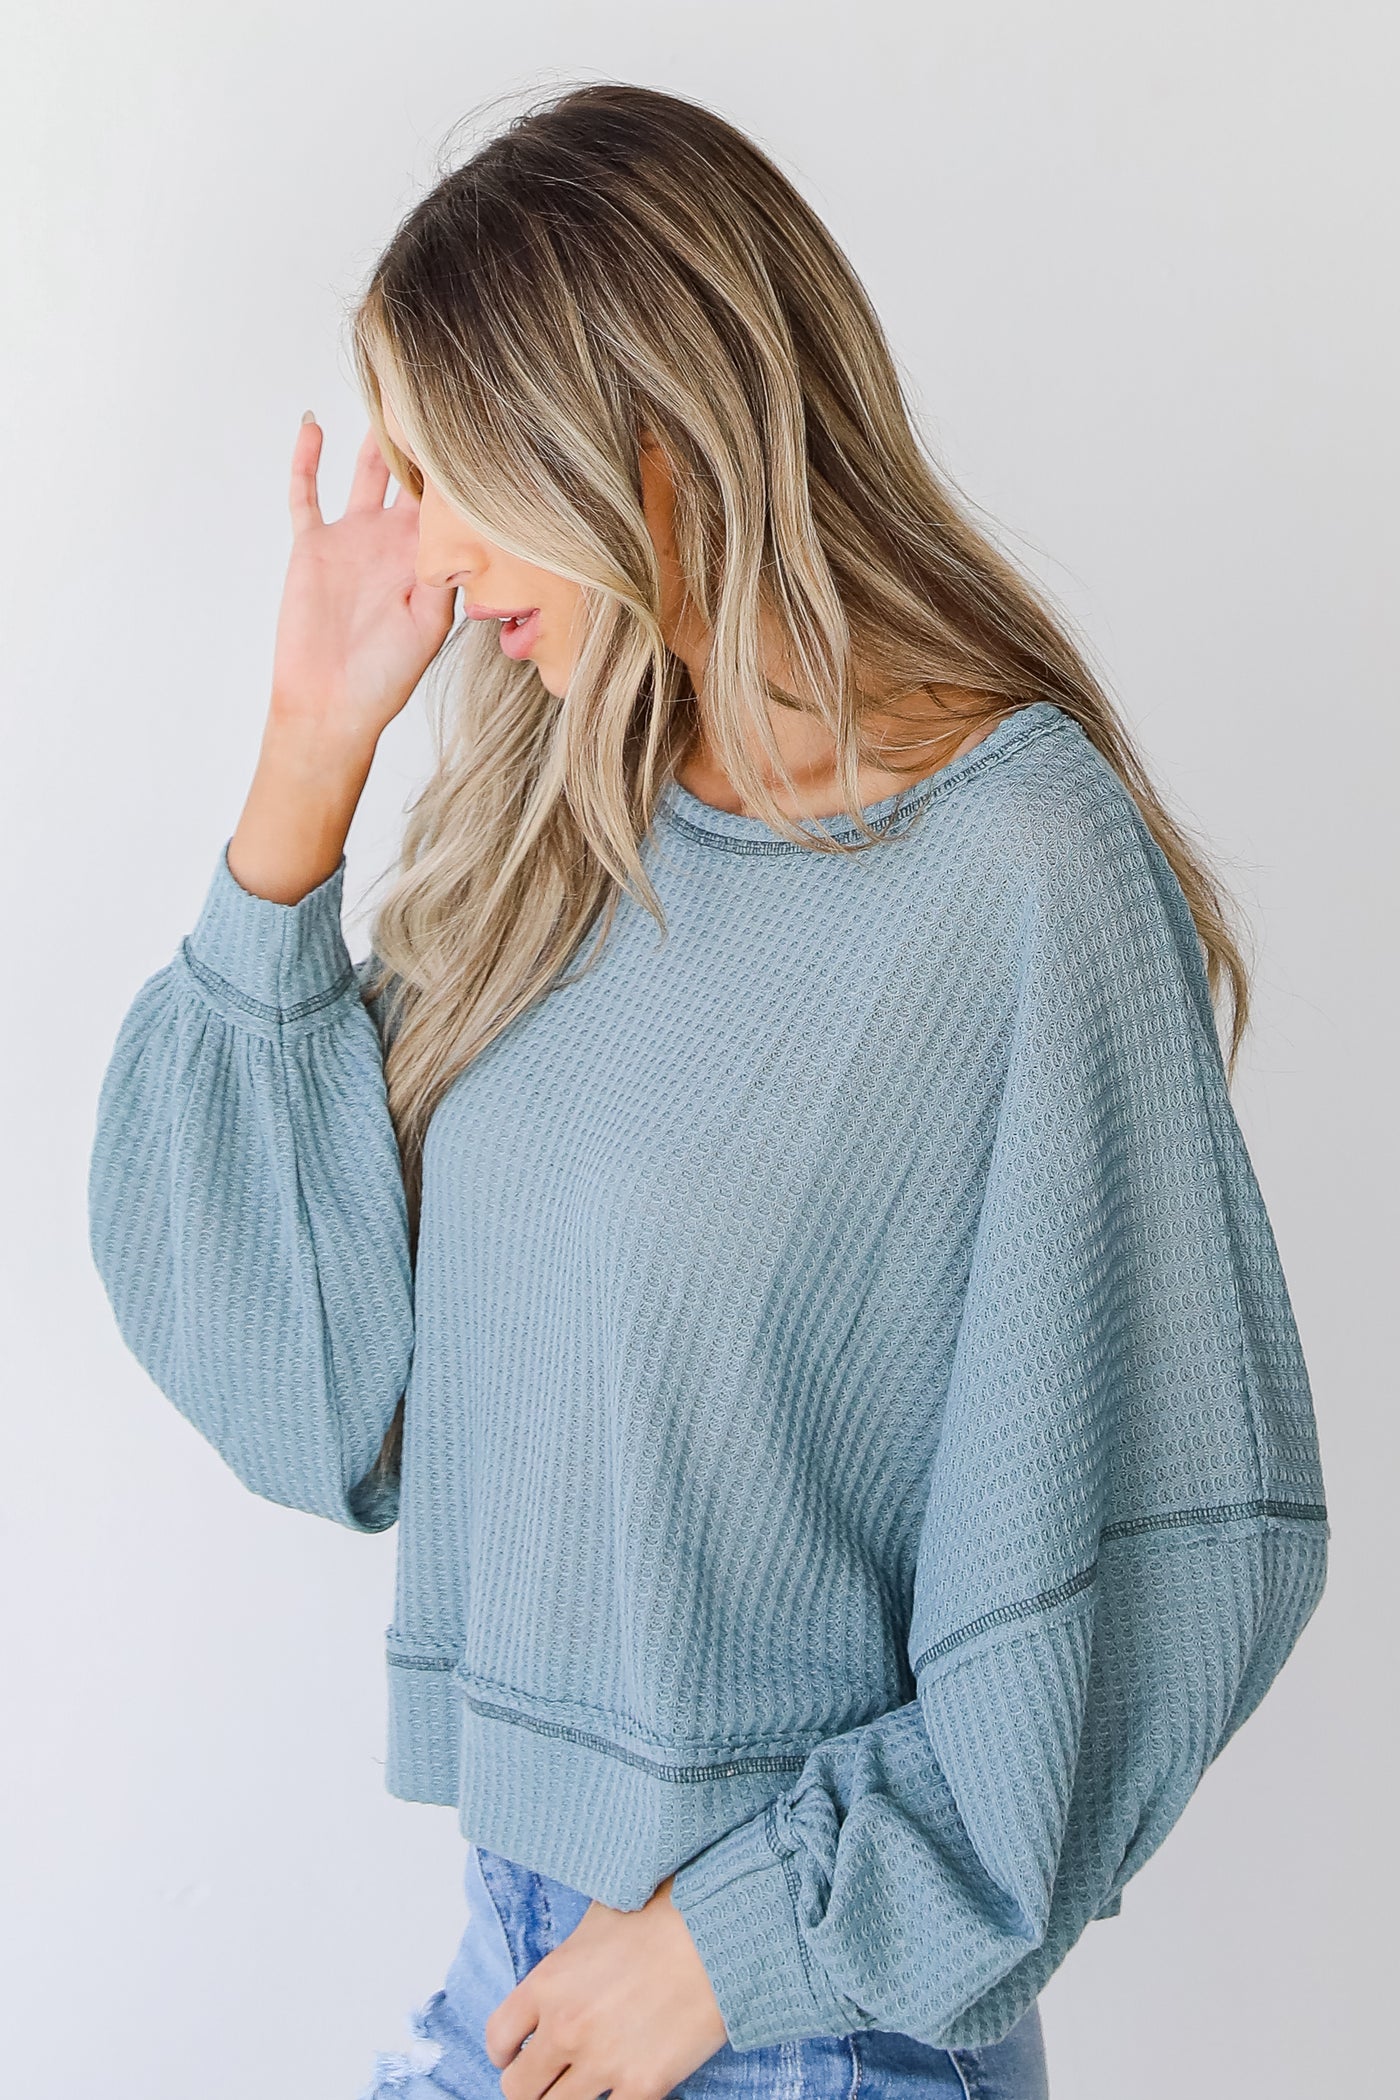 Waffle Knit Top in light blue side view